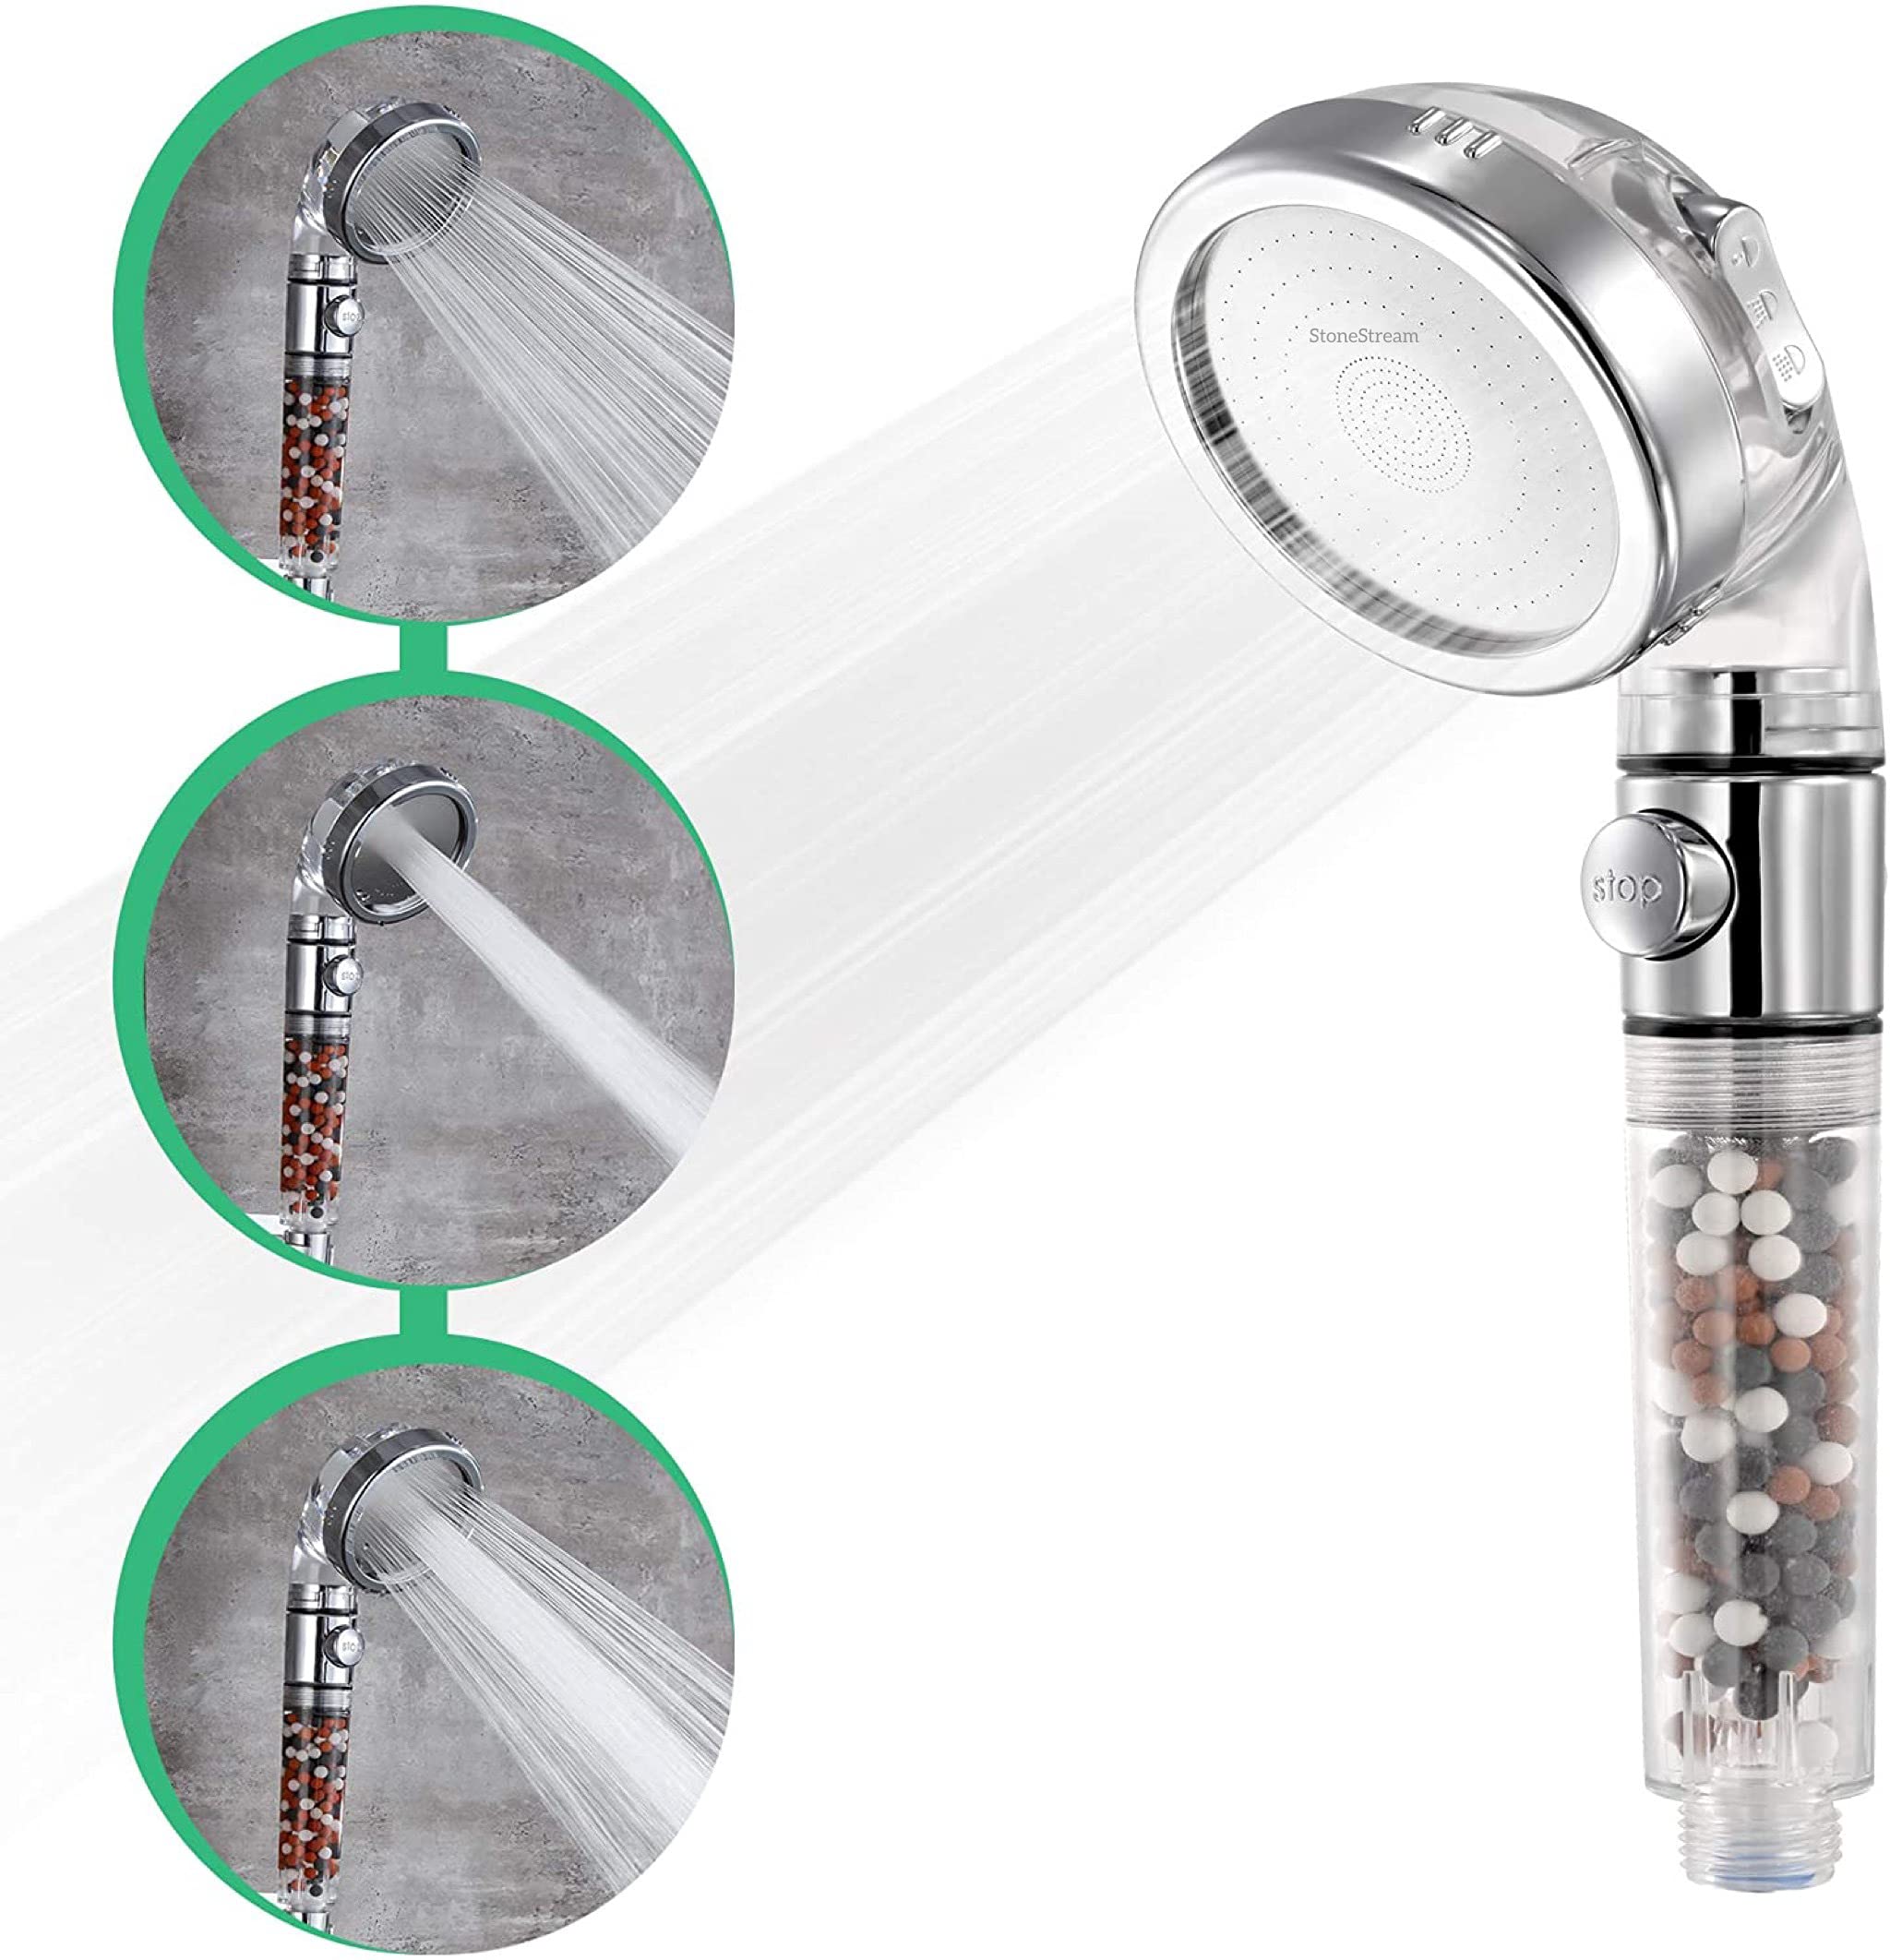 Energy-efficient eco shower head with water-saving technology